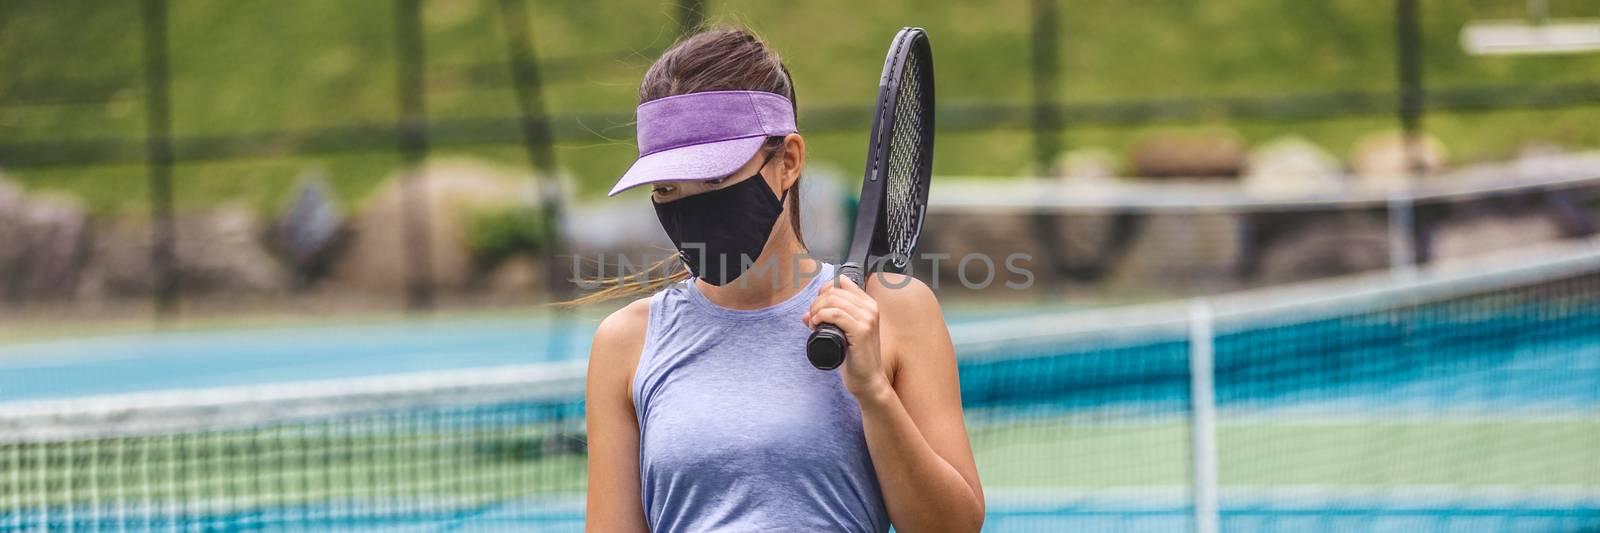 Tennis court reopen after covid-19 confinement. Woman athlete player wearing face mask during game playing oustide on outdoor courts banner panoramic by Maridav